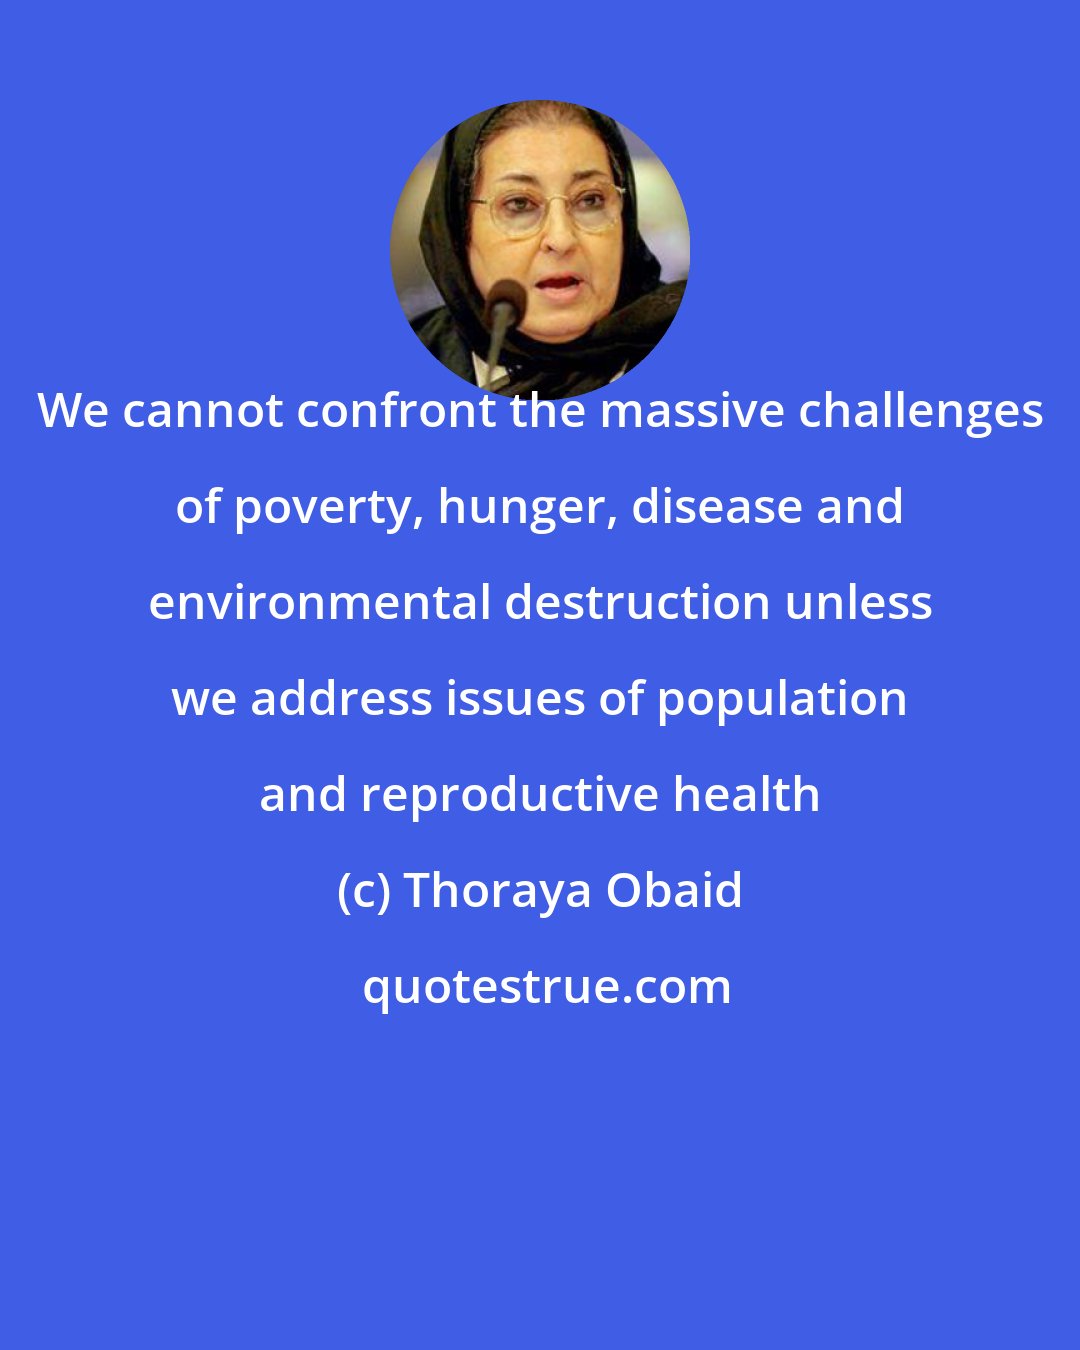 Thoraya Obaid: We cannot confront the massive challenges of poverty, hunger, disease and environmental destruction unless we address issues of population and reproductive health